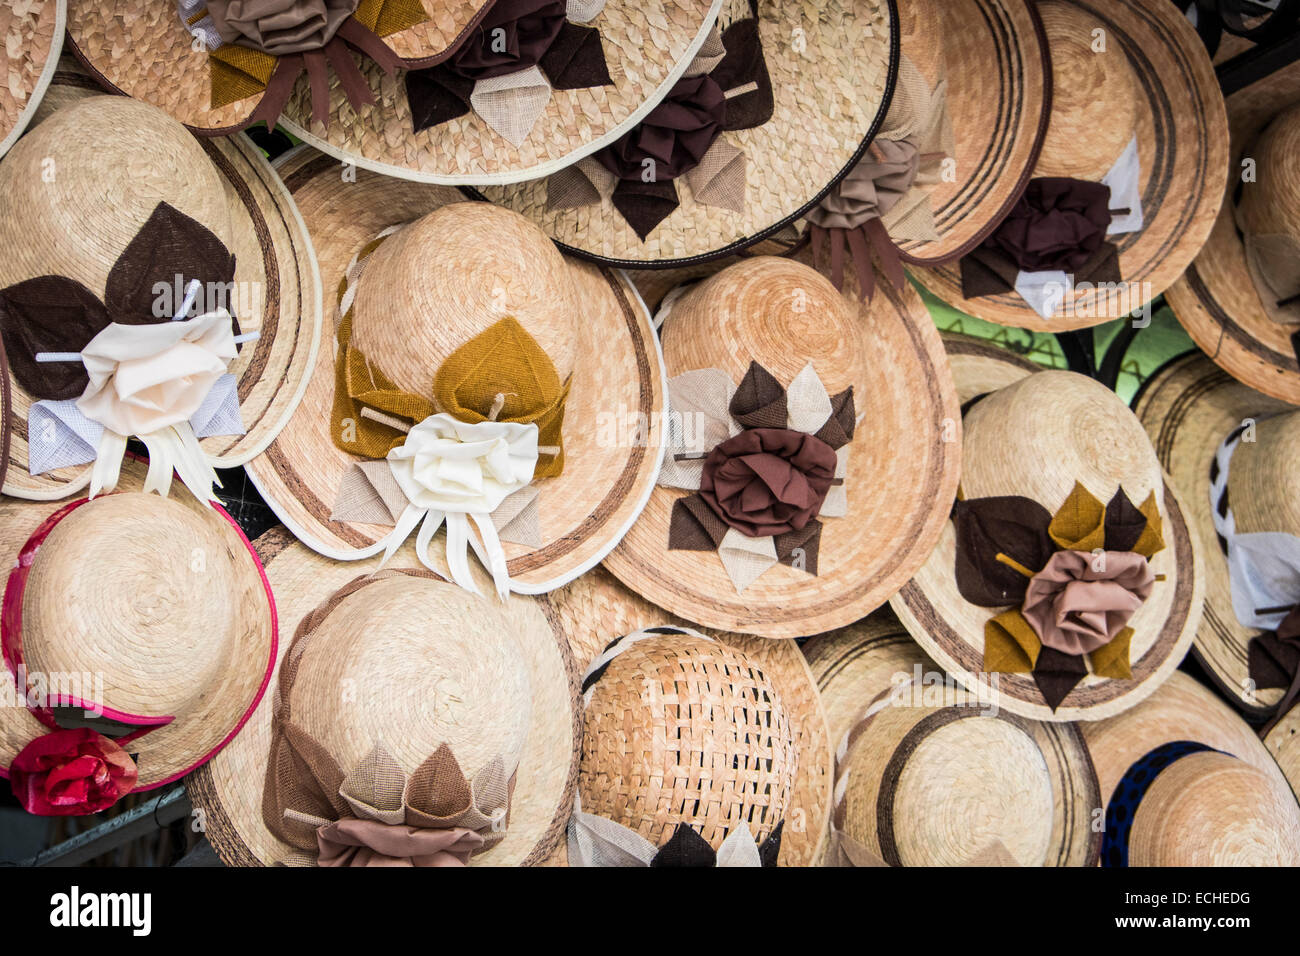 Sales display of several hand crafted straw hats in Puerto Vallarta, Mexico. Stock Photo